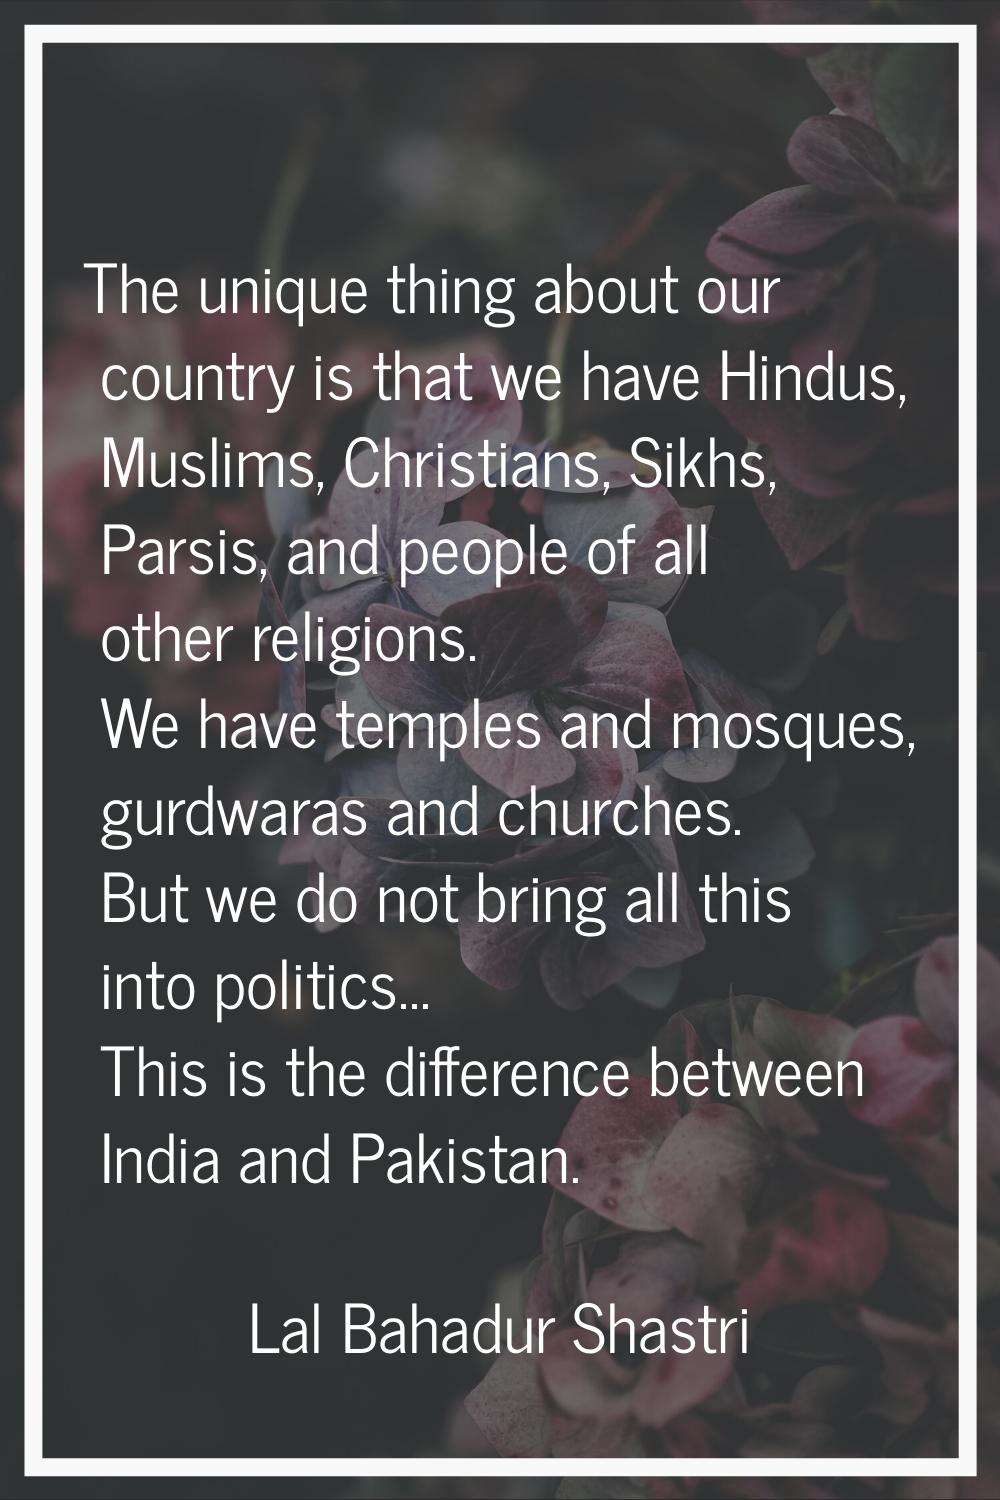 The unique thing about our country is that we have Hindus, Muslims, Christians, Sikhs, Parsis, and 